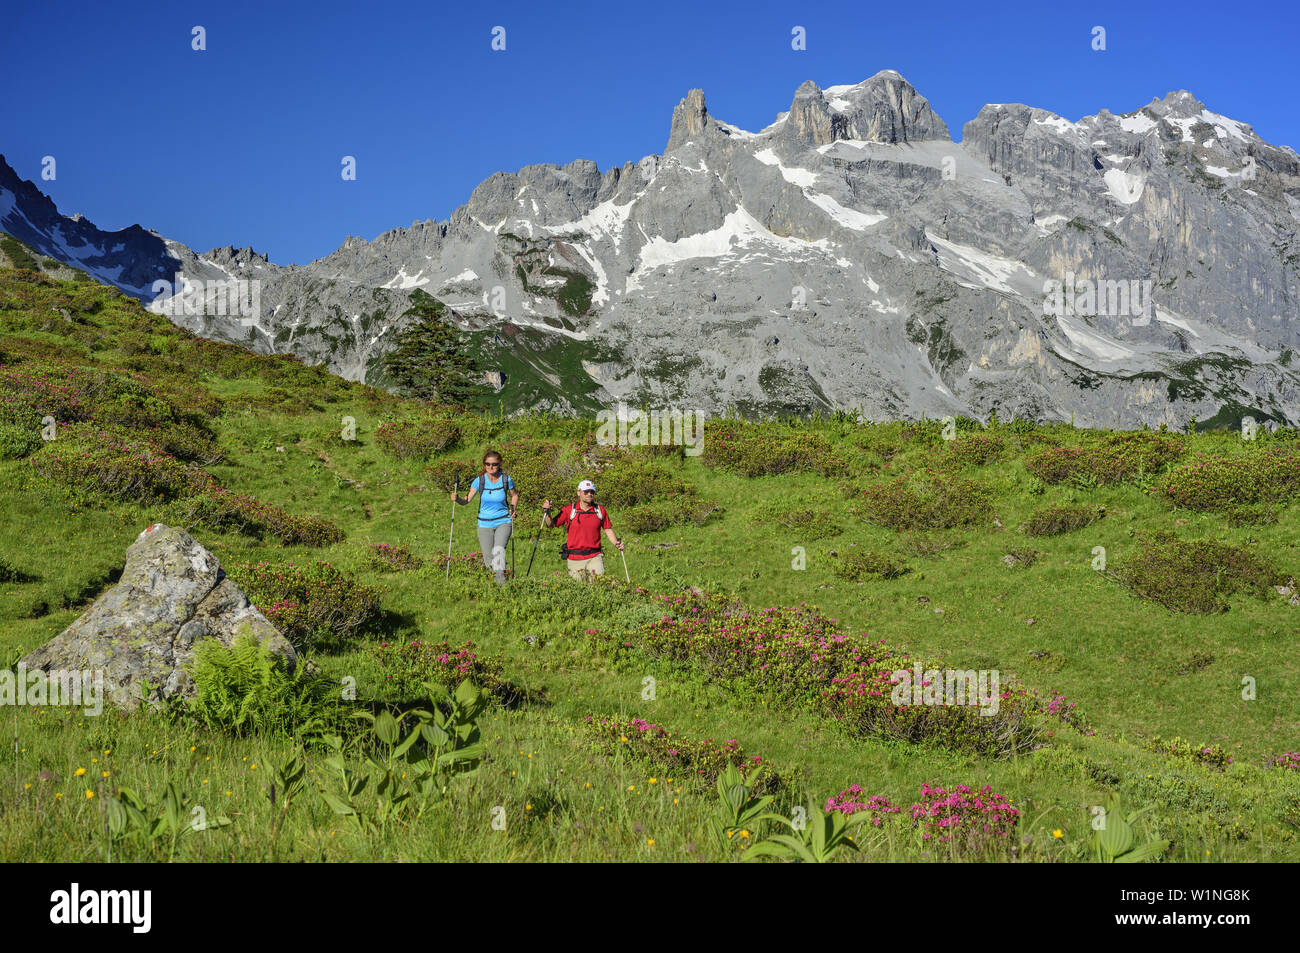 Woman and man hiking on meadow with alpine roses in blossom in front of Drei Tuerme and Drusenfluh, Raetikon, Vorarlberg, Austria Stock Photo